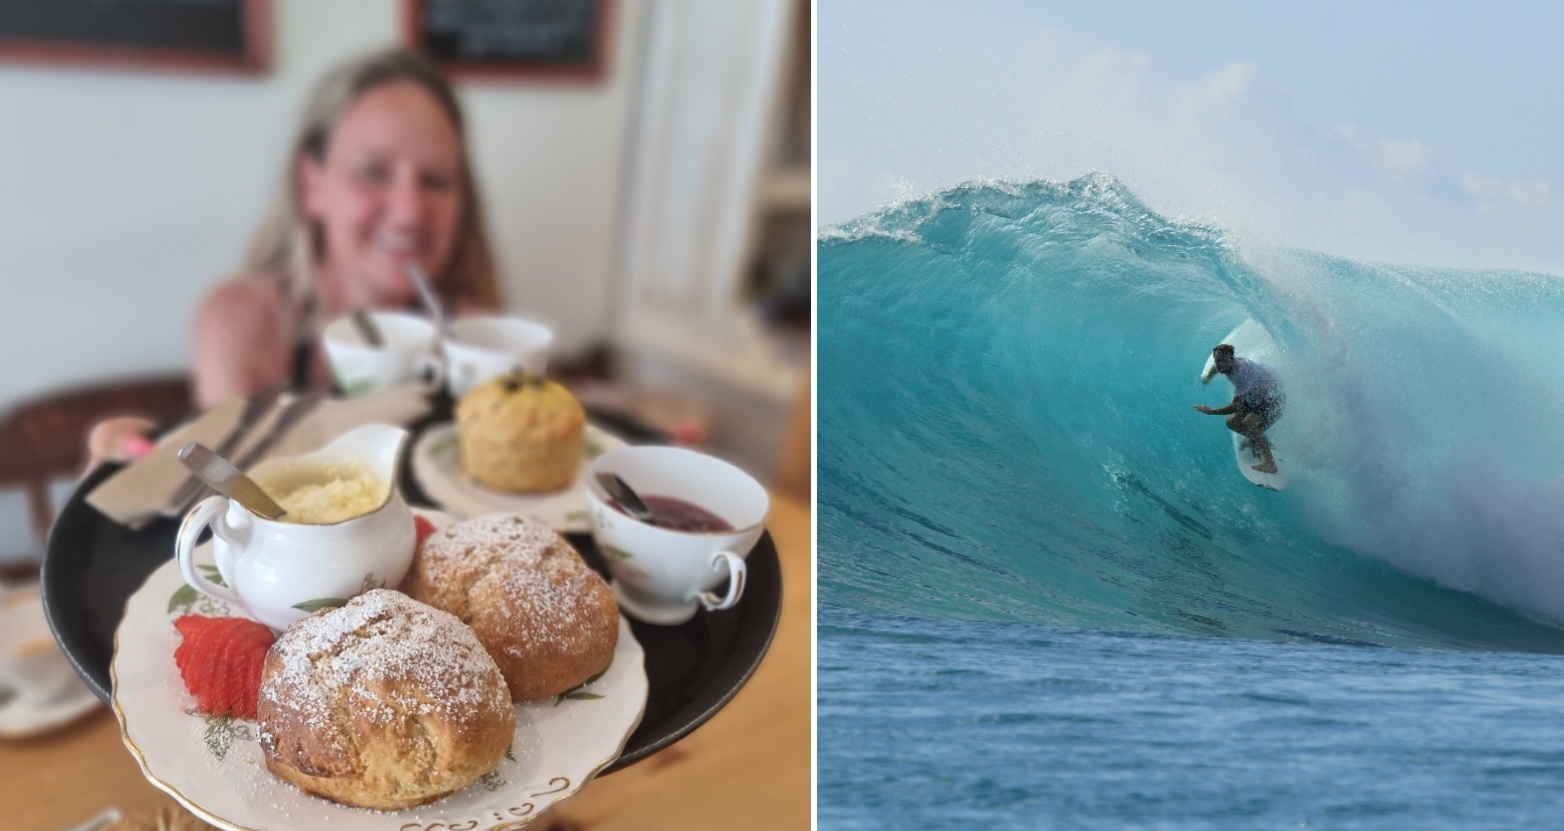 person holding cream tea, and second image a surfer